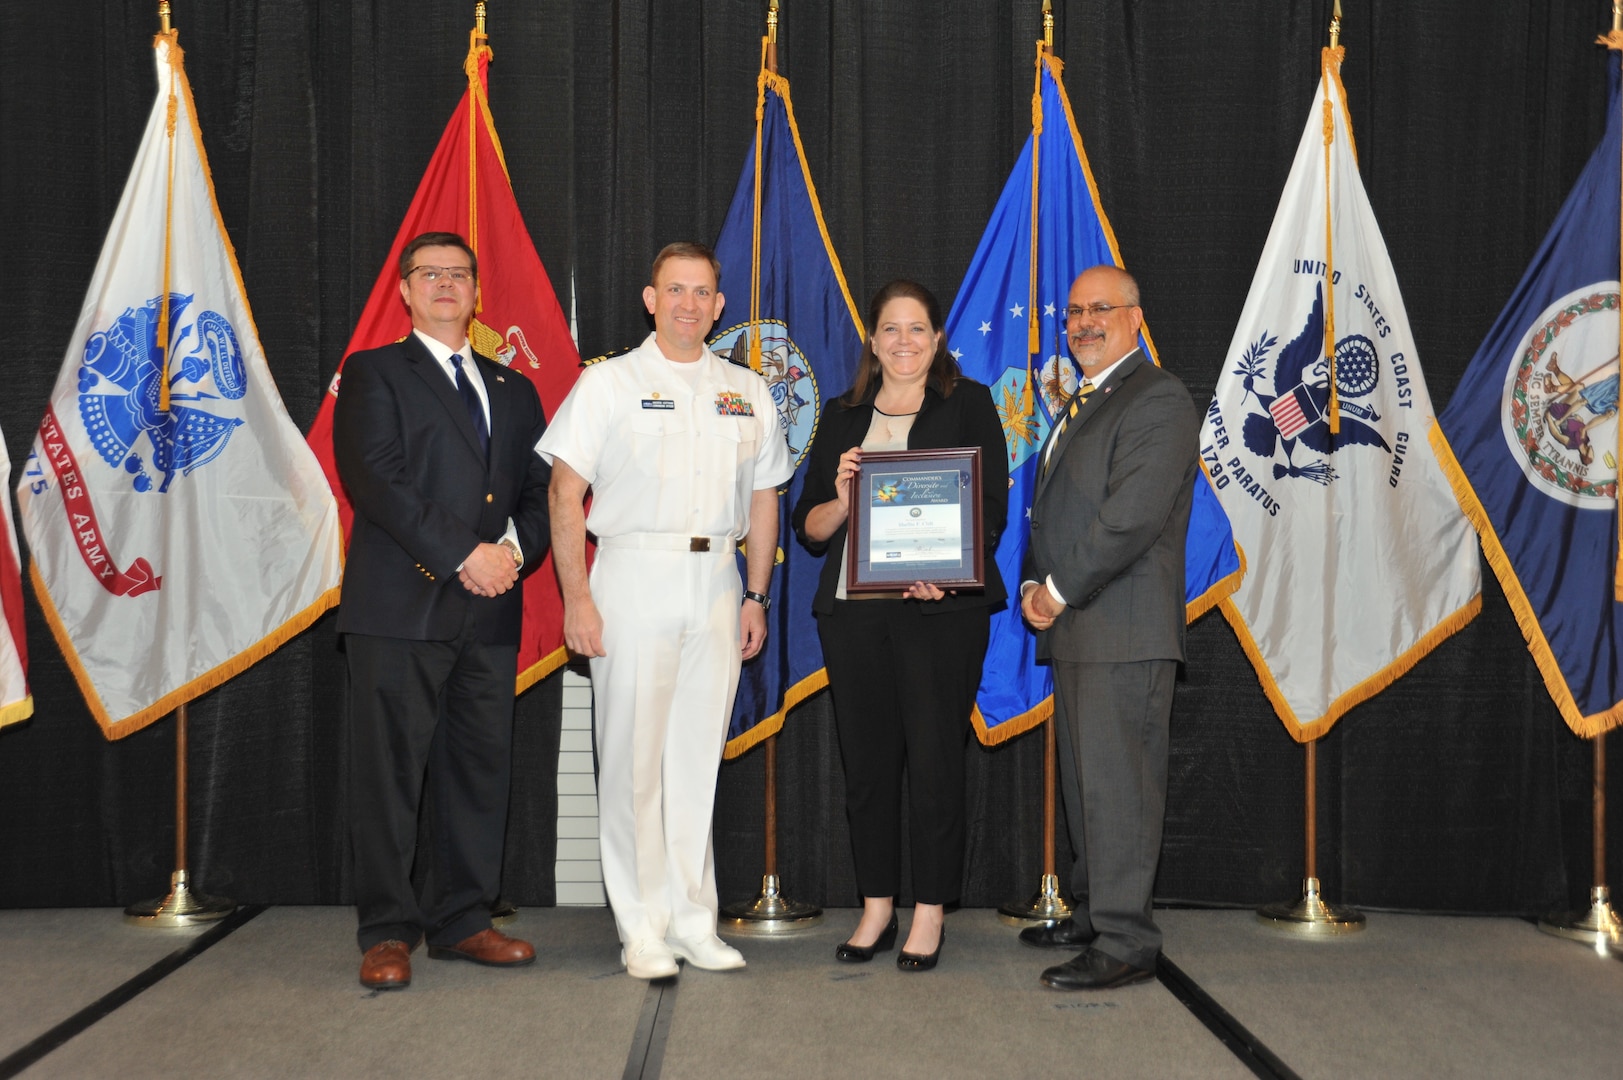 IMAGE: Shellie Clift is presented the Commander's Diversity and Inclusion Award at Naval Surface Warfare Center Dahlgren Division's annual awards ceremony, Apr. 26 at the Fredericksburg Expo and Conference Center.